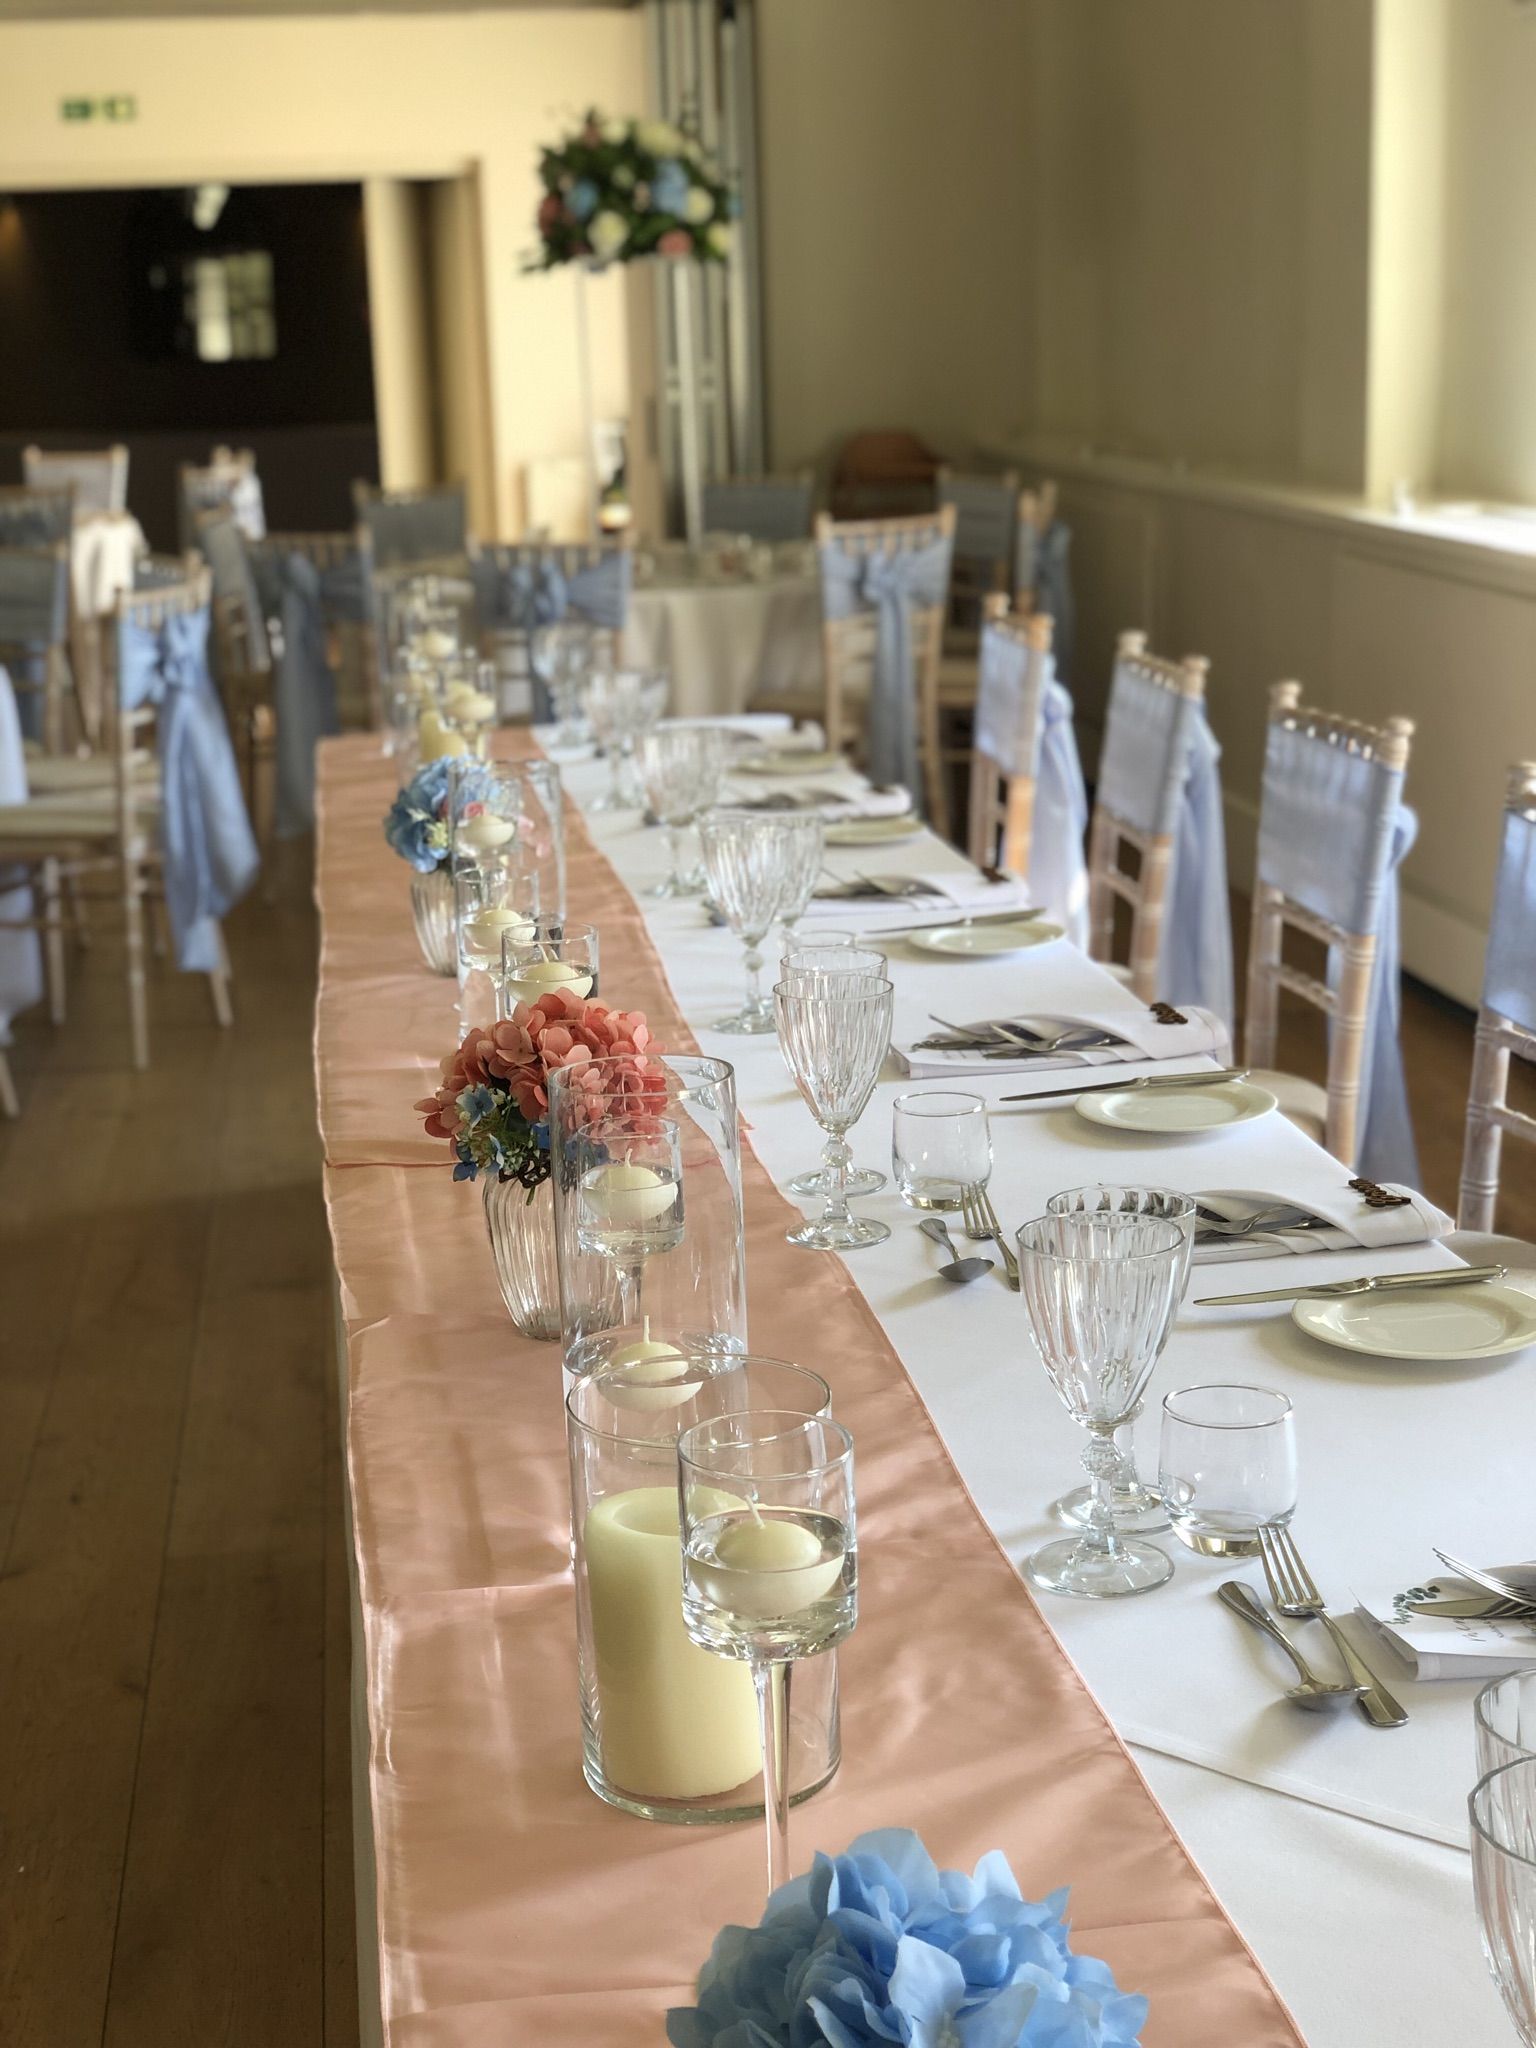 a long table is set for a formal function.